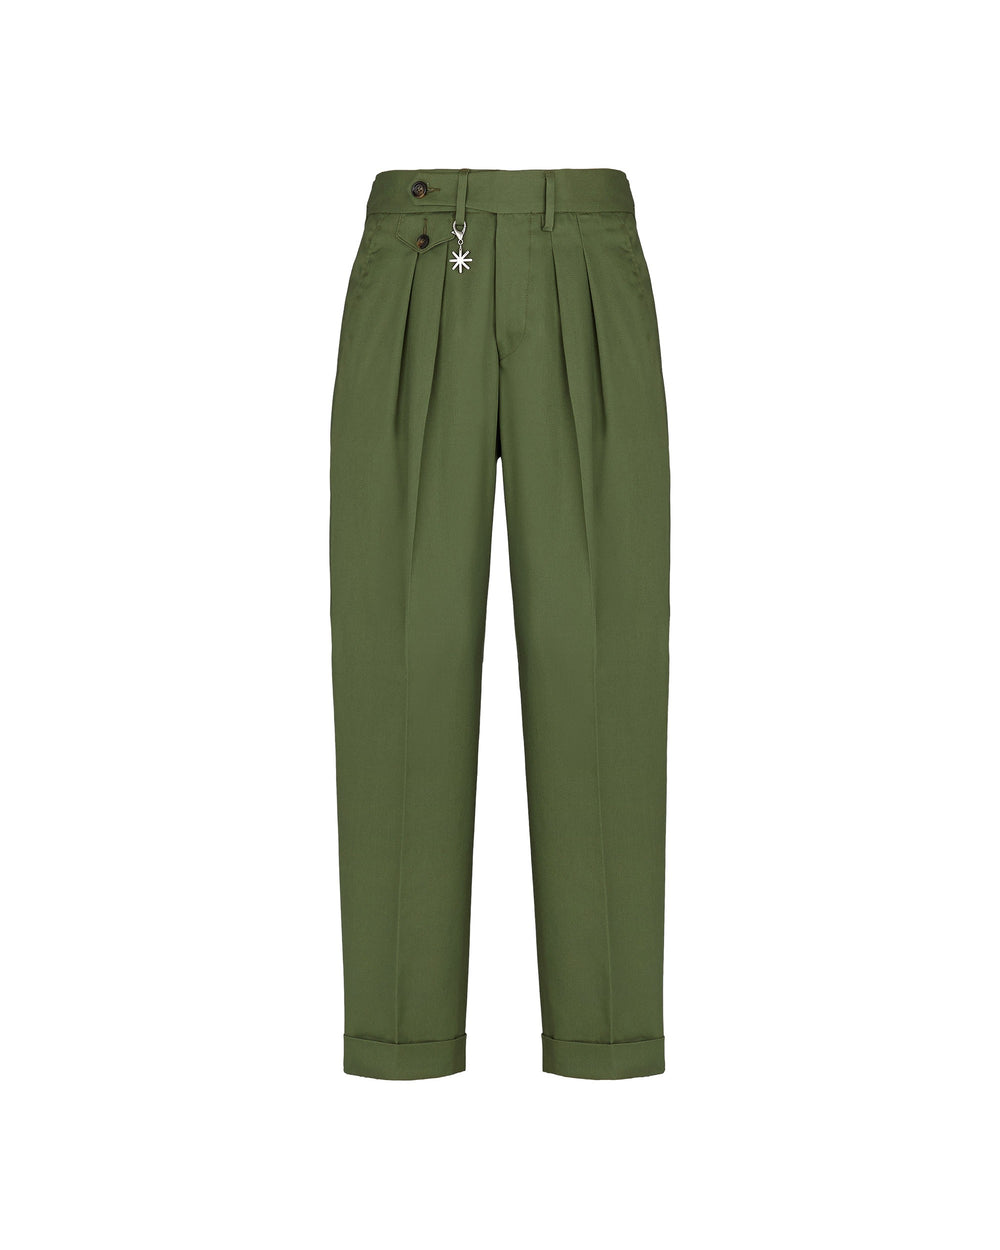 green double pleat baggy twill cotton blend trousers